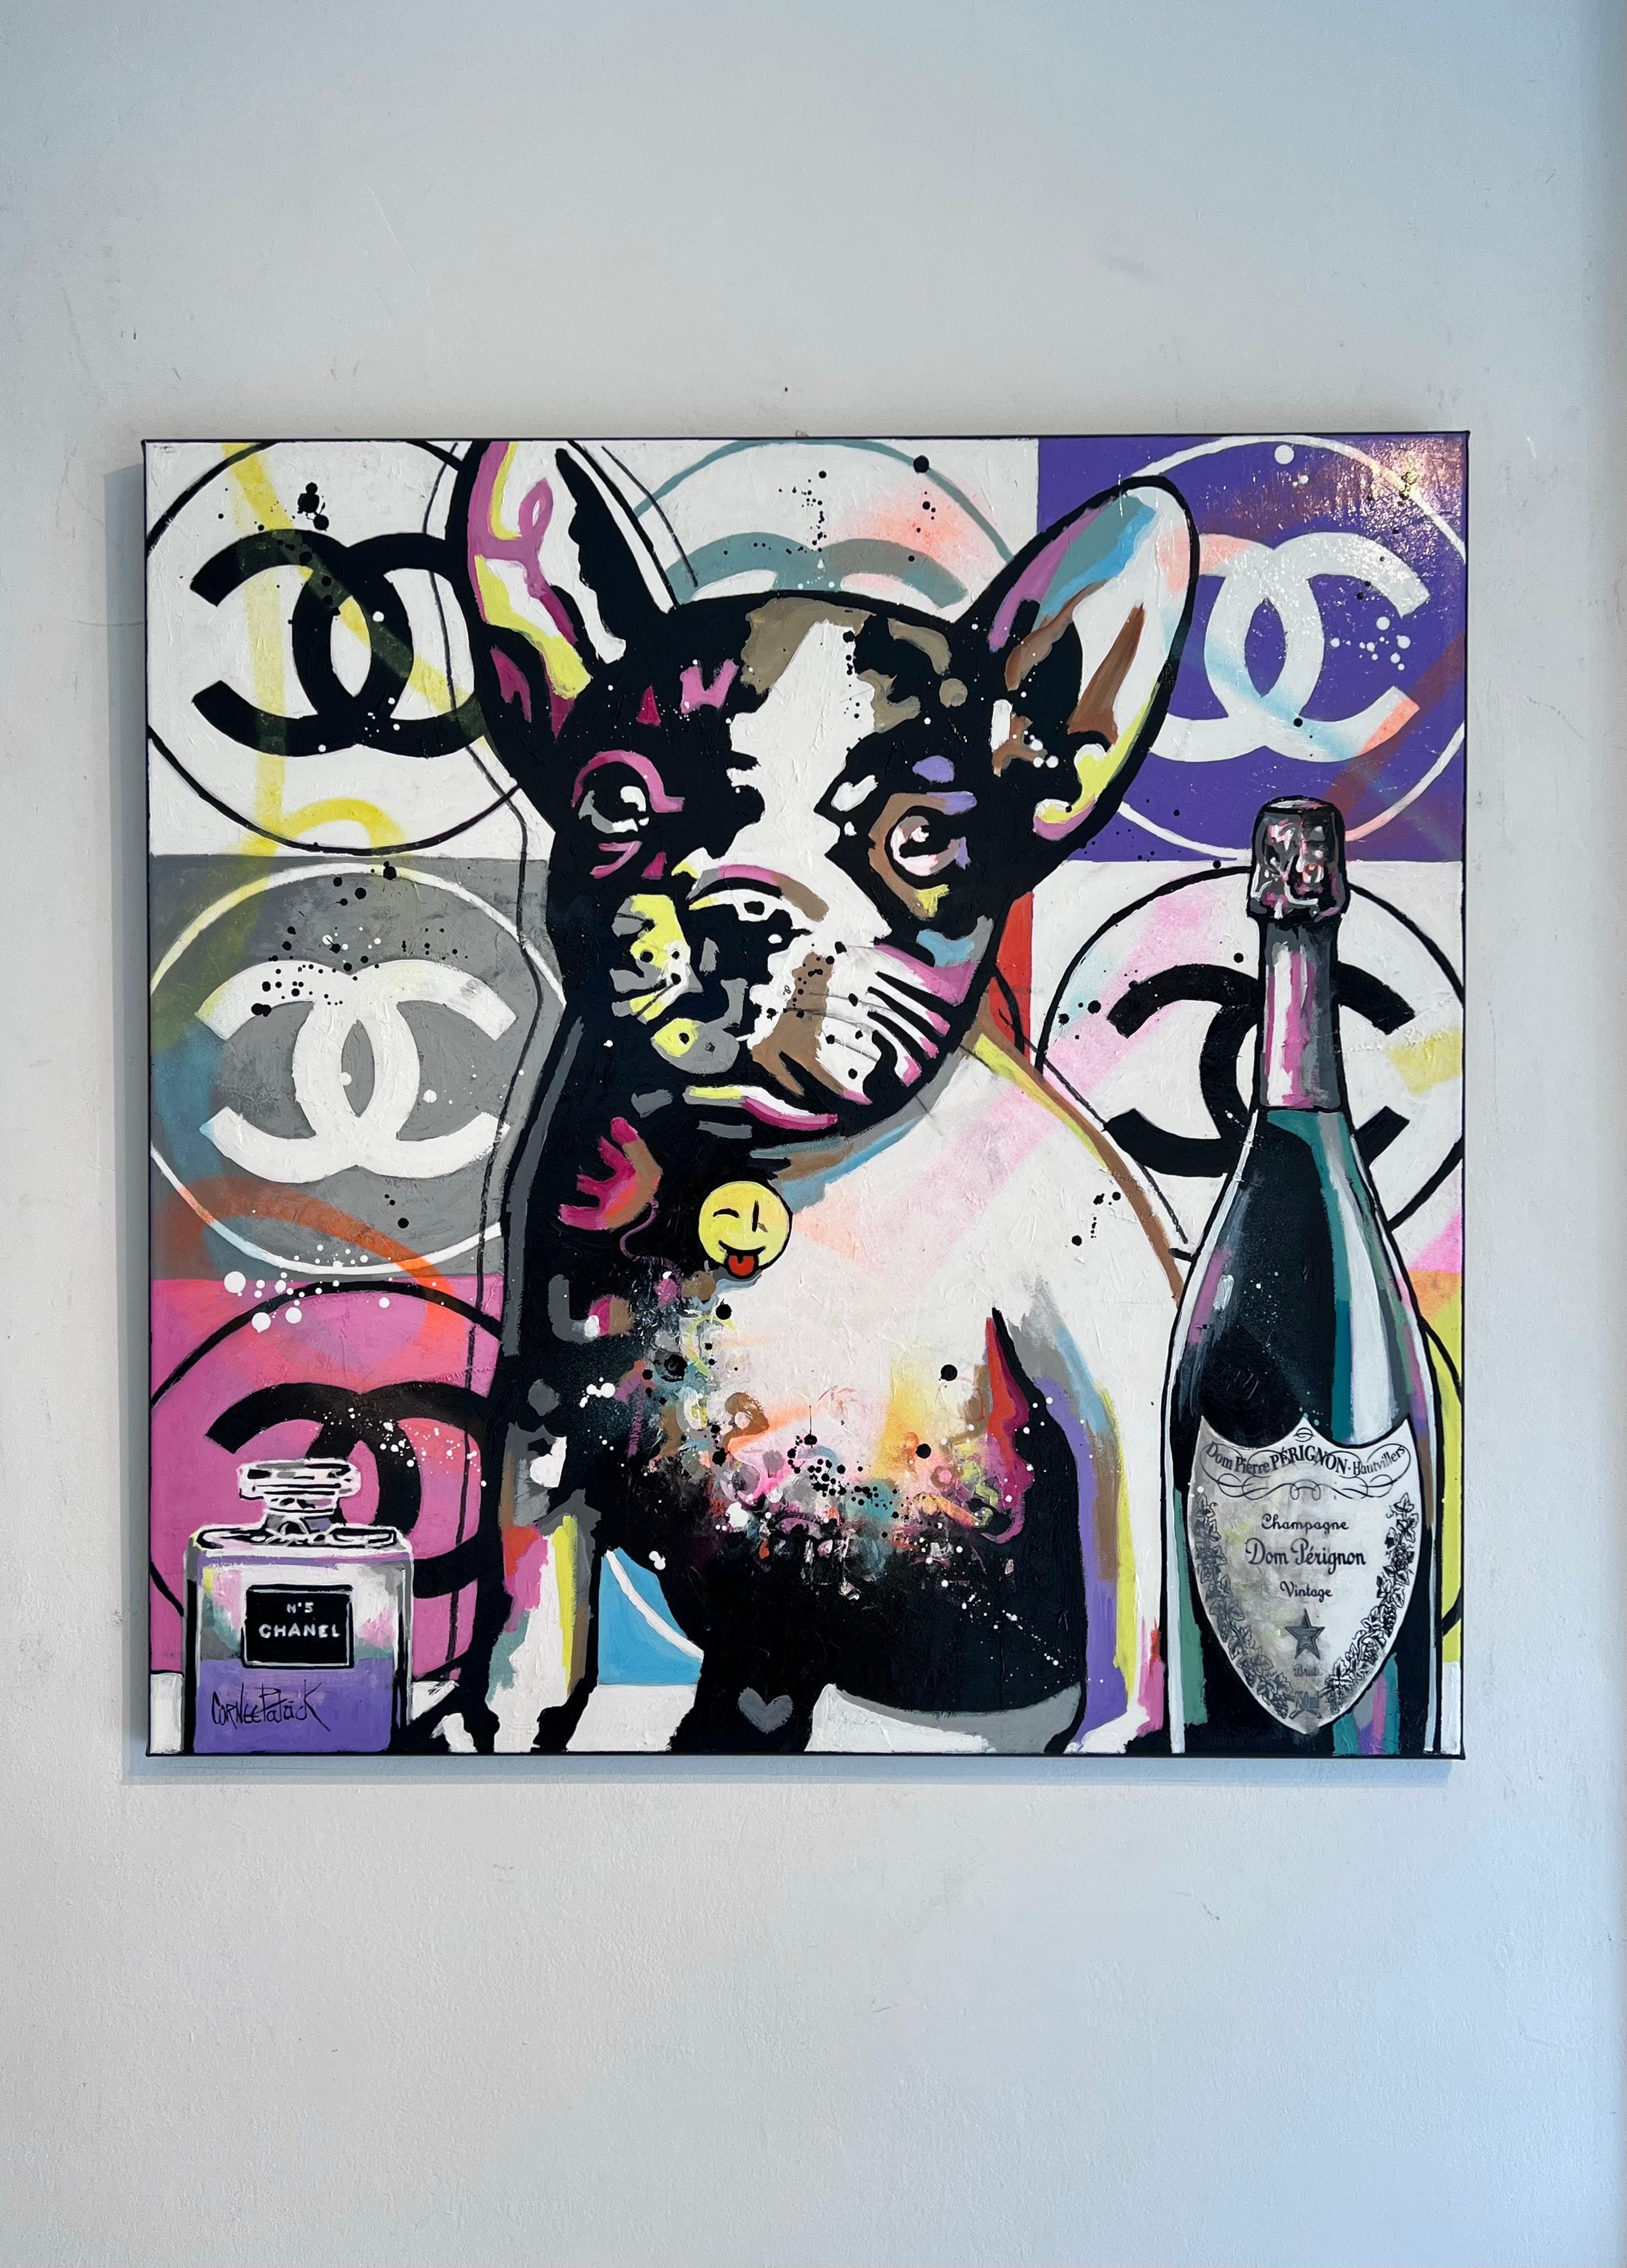  French Bulldog loves Chanel and Dom Pérignon-original abstract pop art-painting - Painting by Patrick Cornee